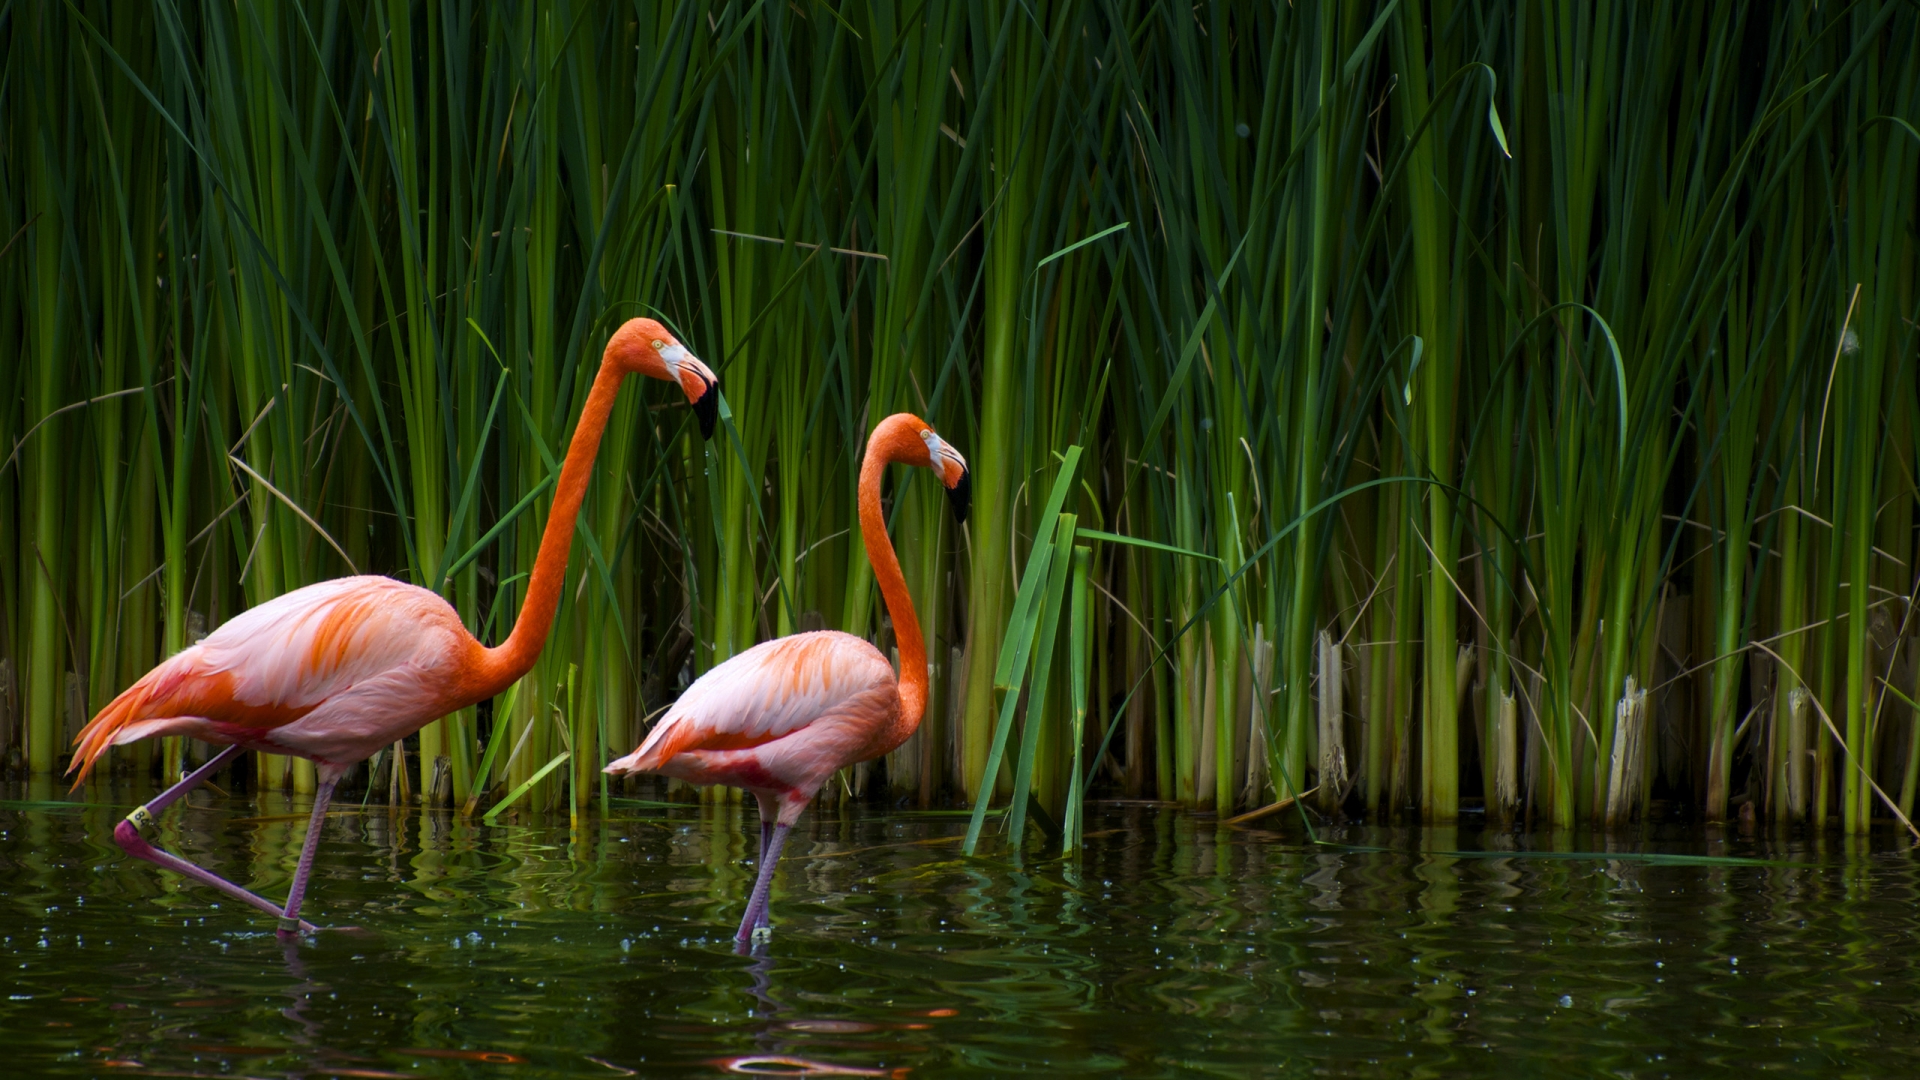 Pair of flamingos for 1920 x 1080 HDTV 1080p resolution